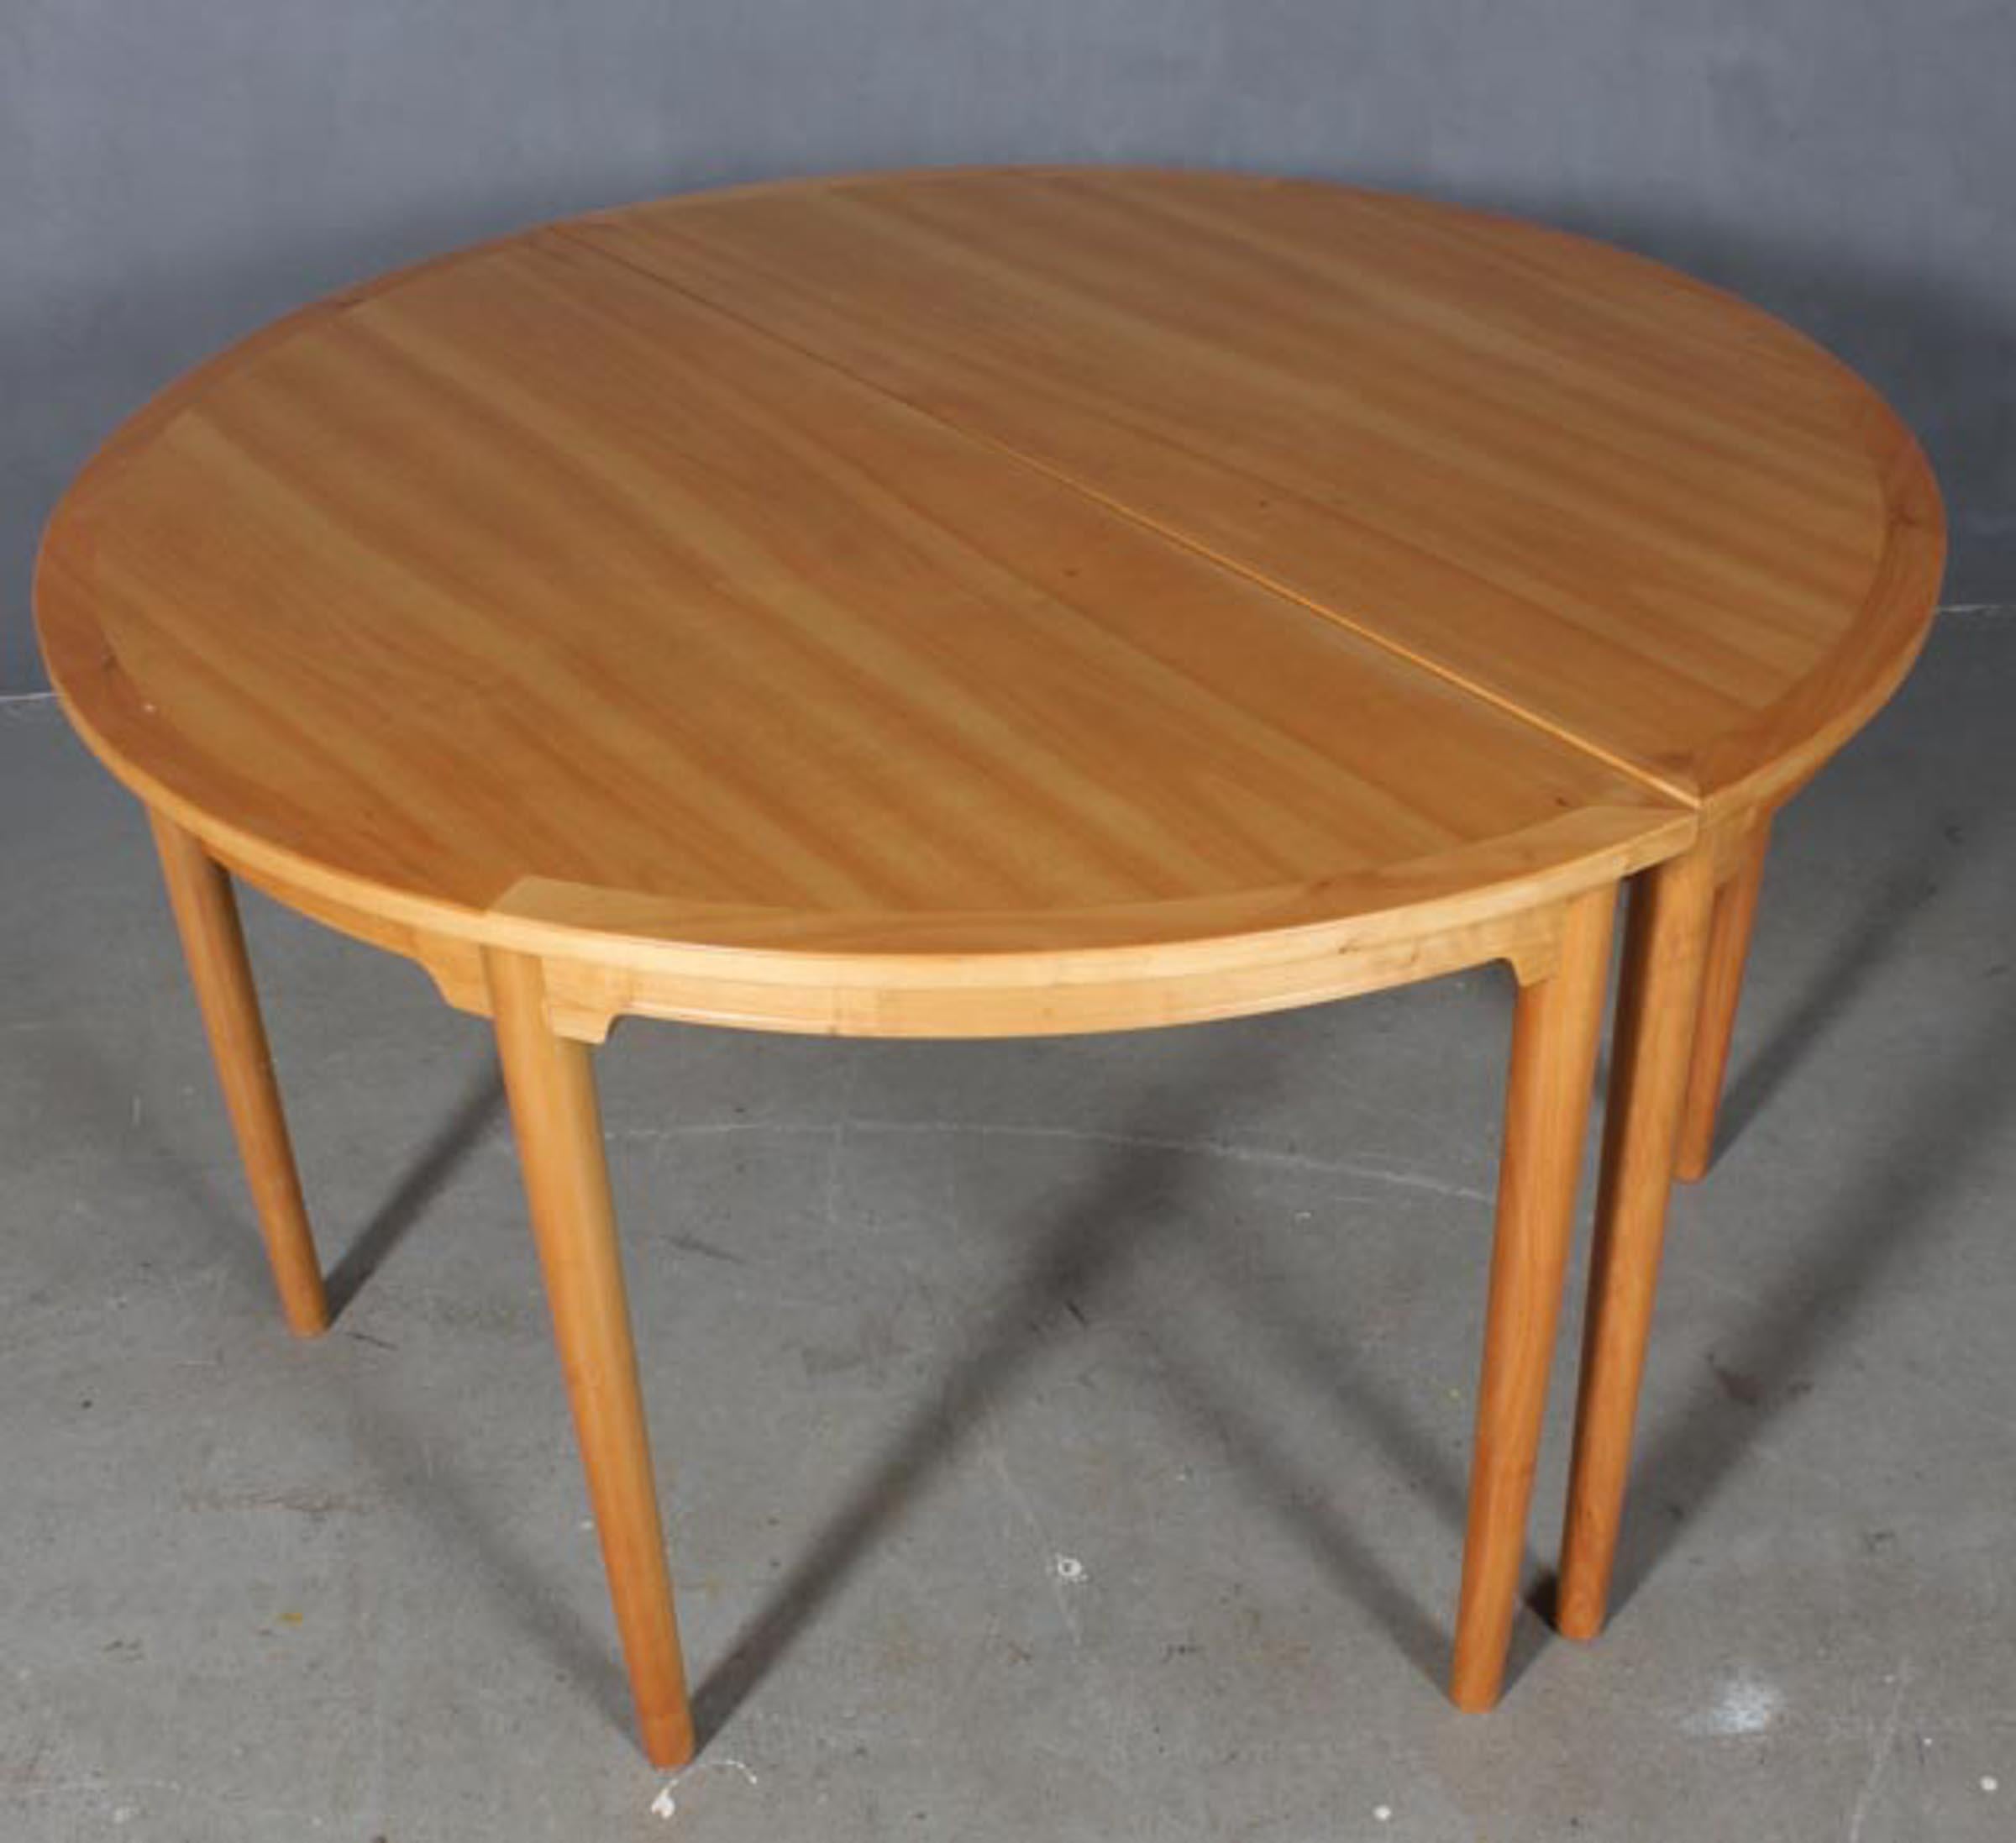 Hans J. Wegner chinese table with frame of cherry.

Two D shaped tables.